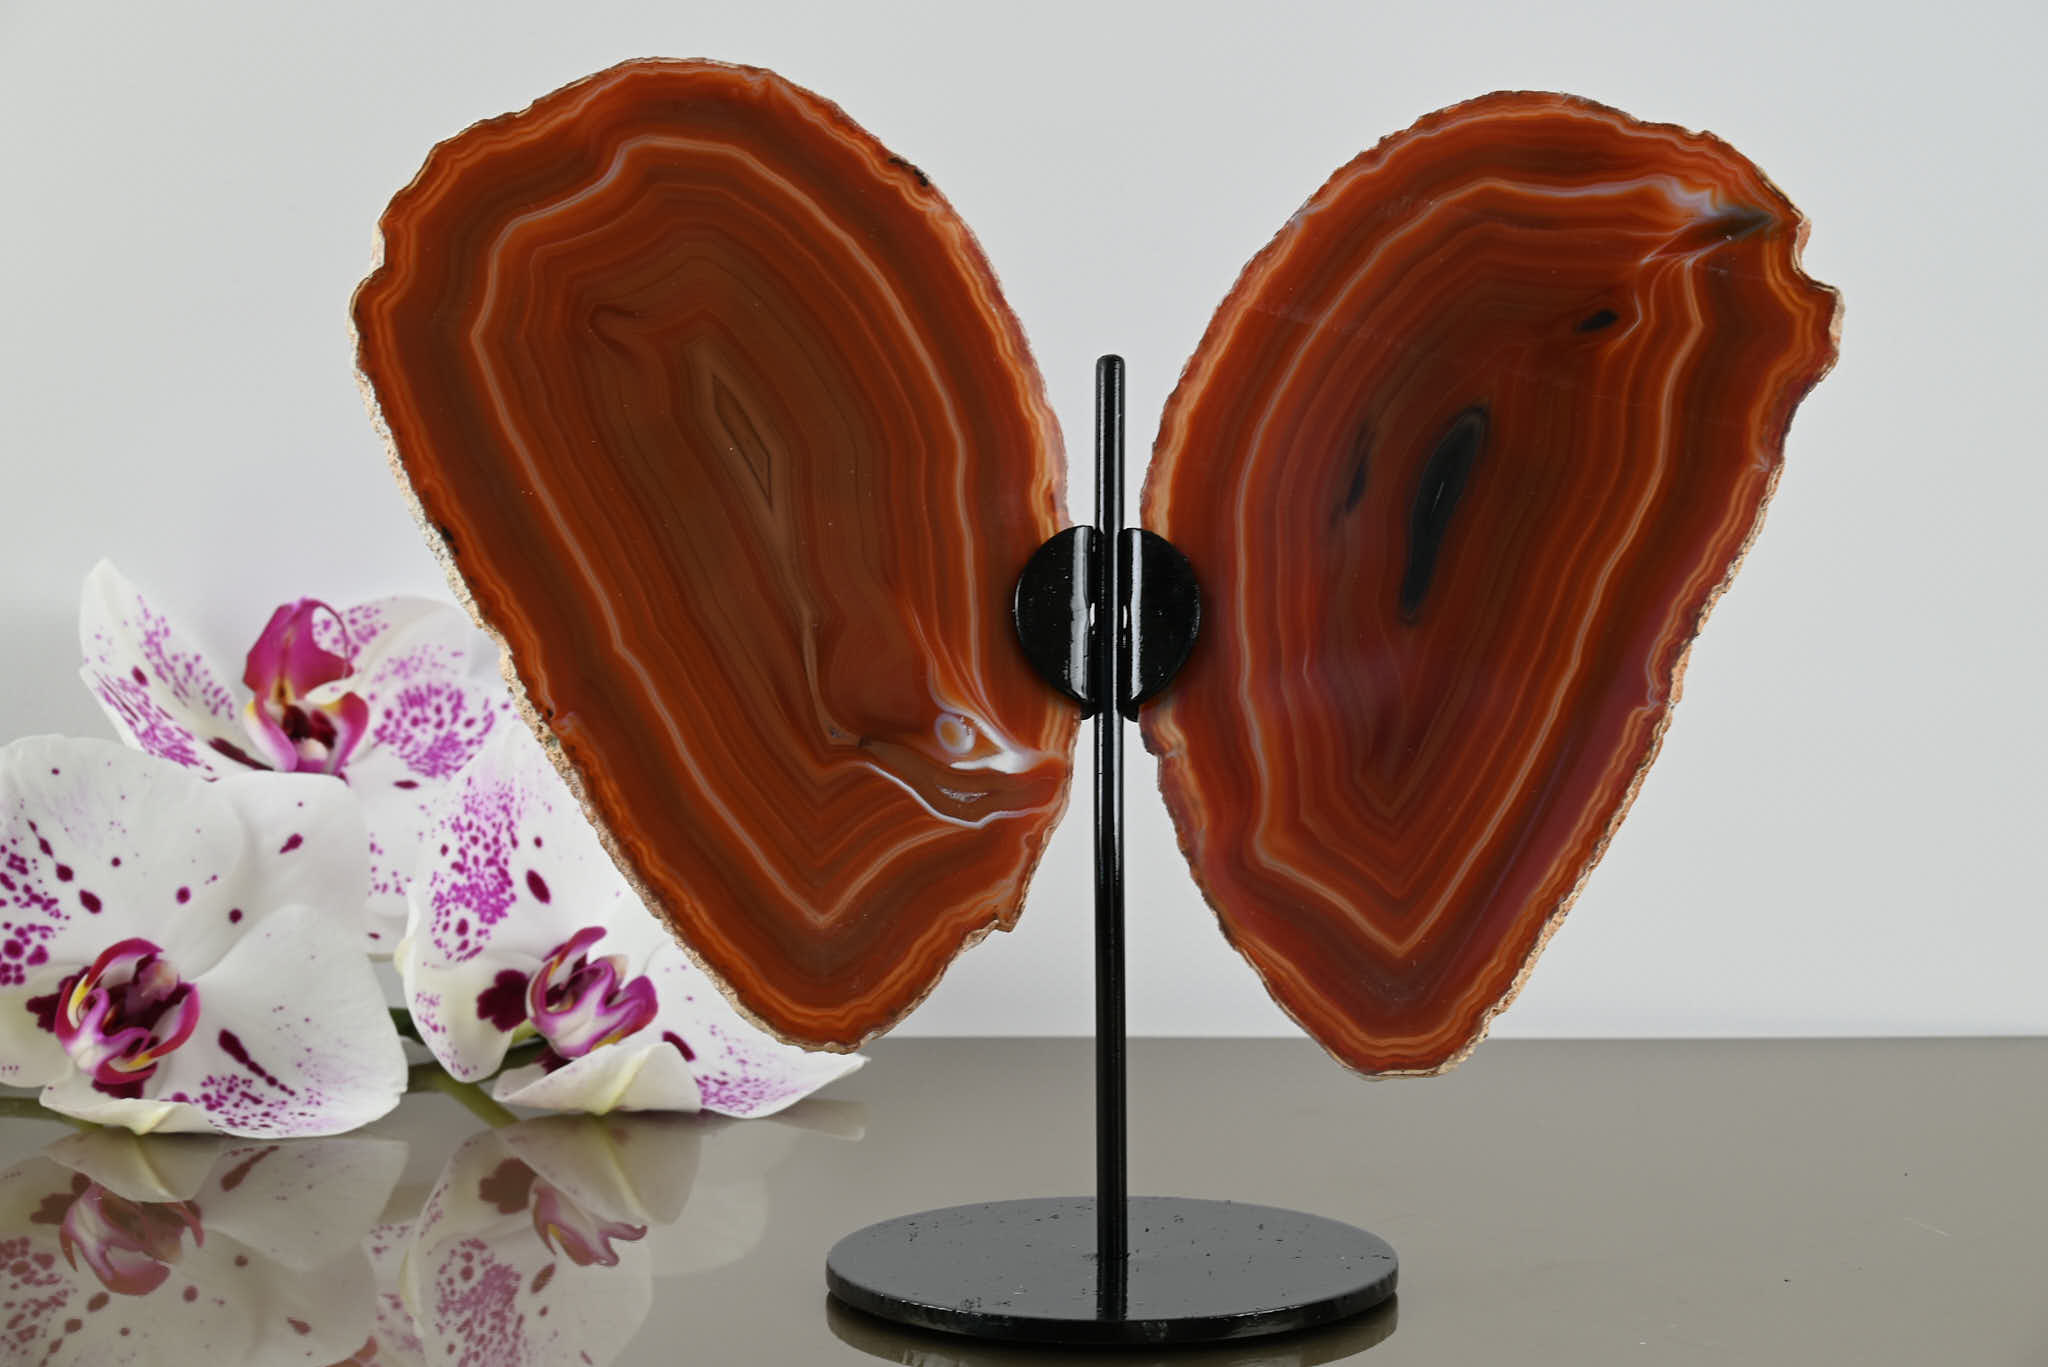 Natural Agate "Butterfly" Slices 6cm Tall - #BUNATU-10004